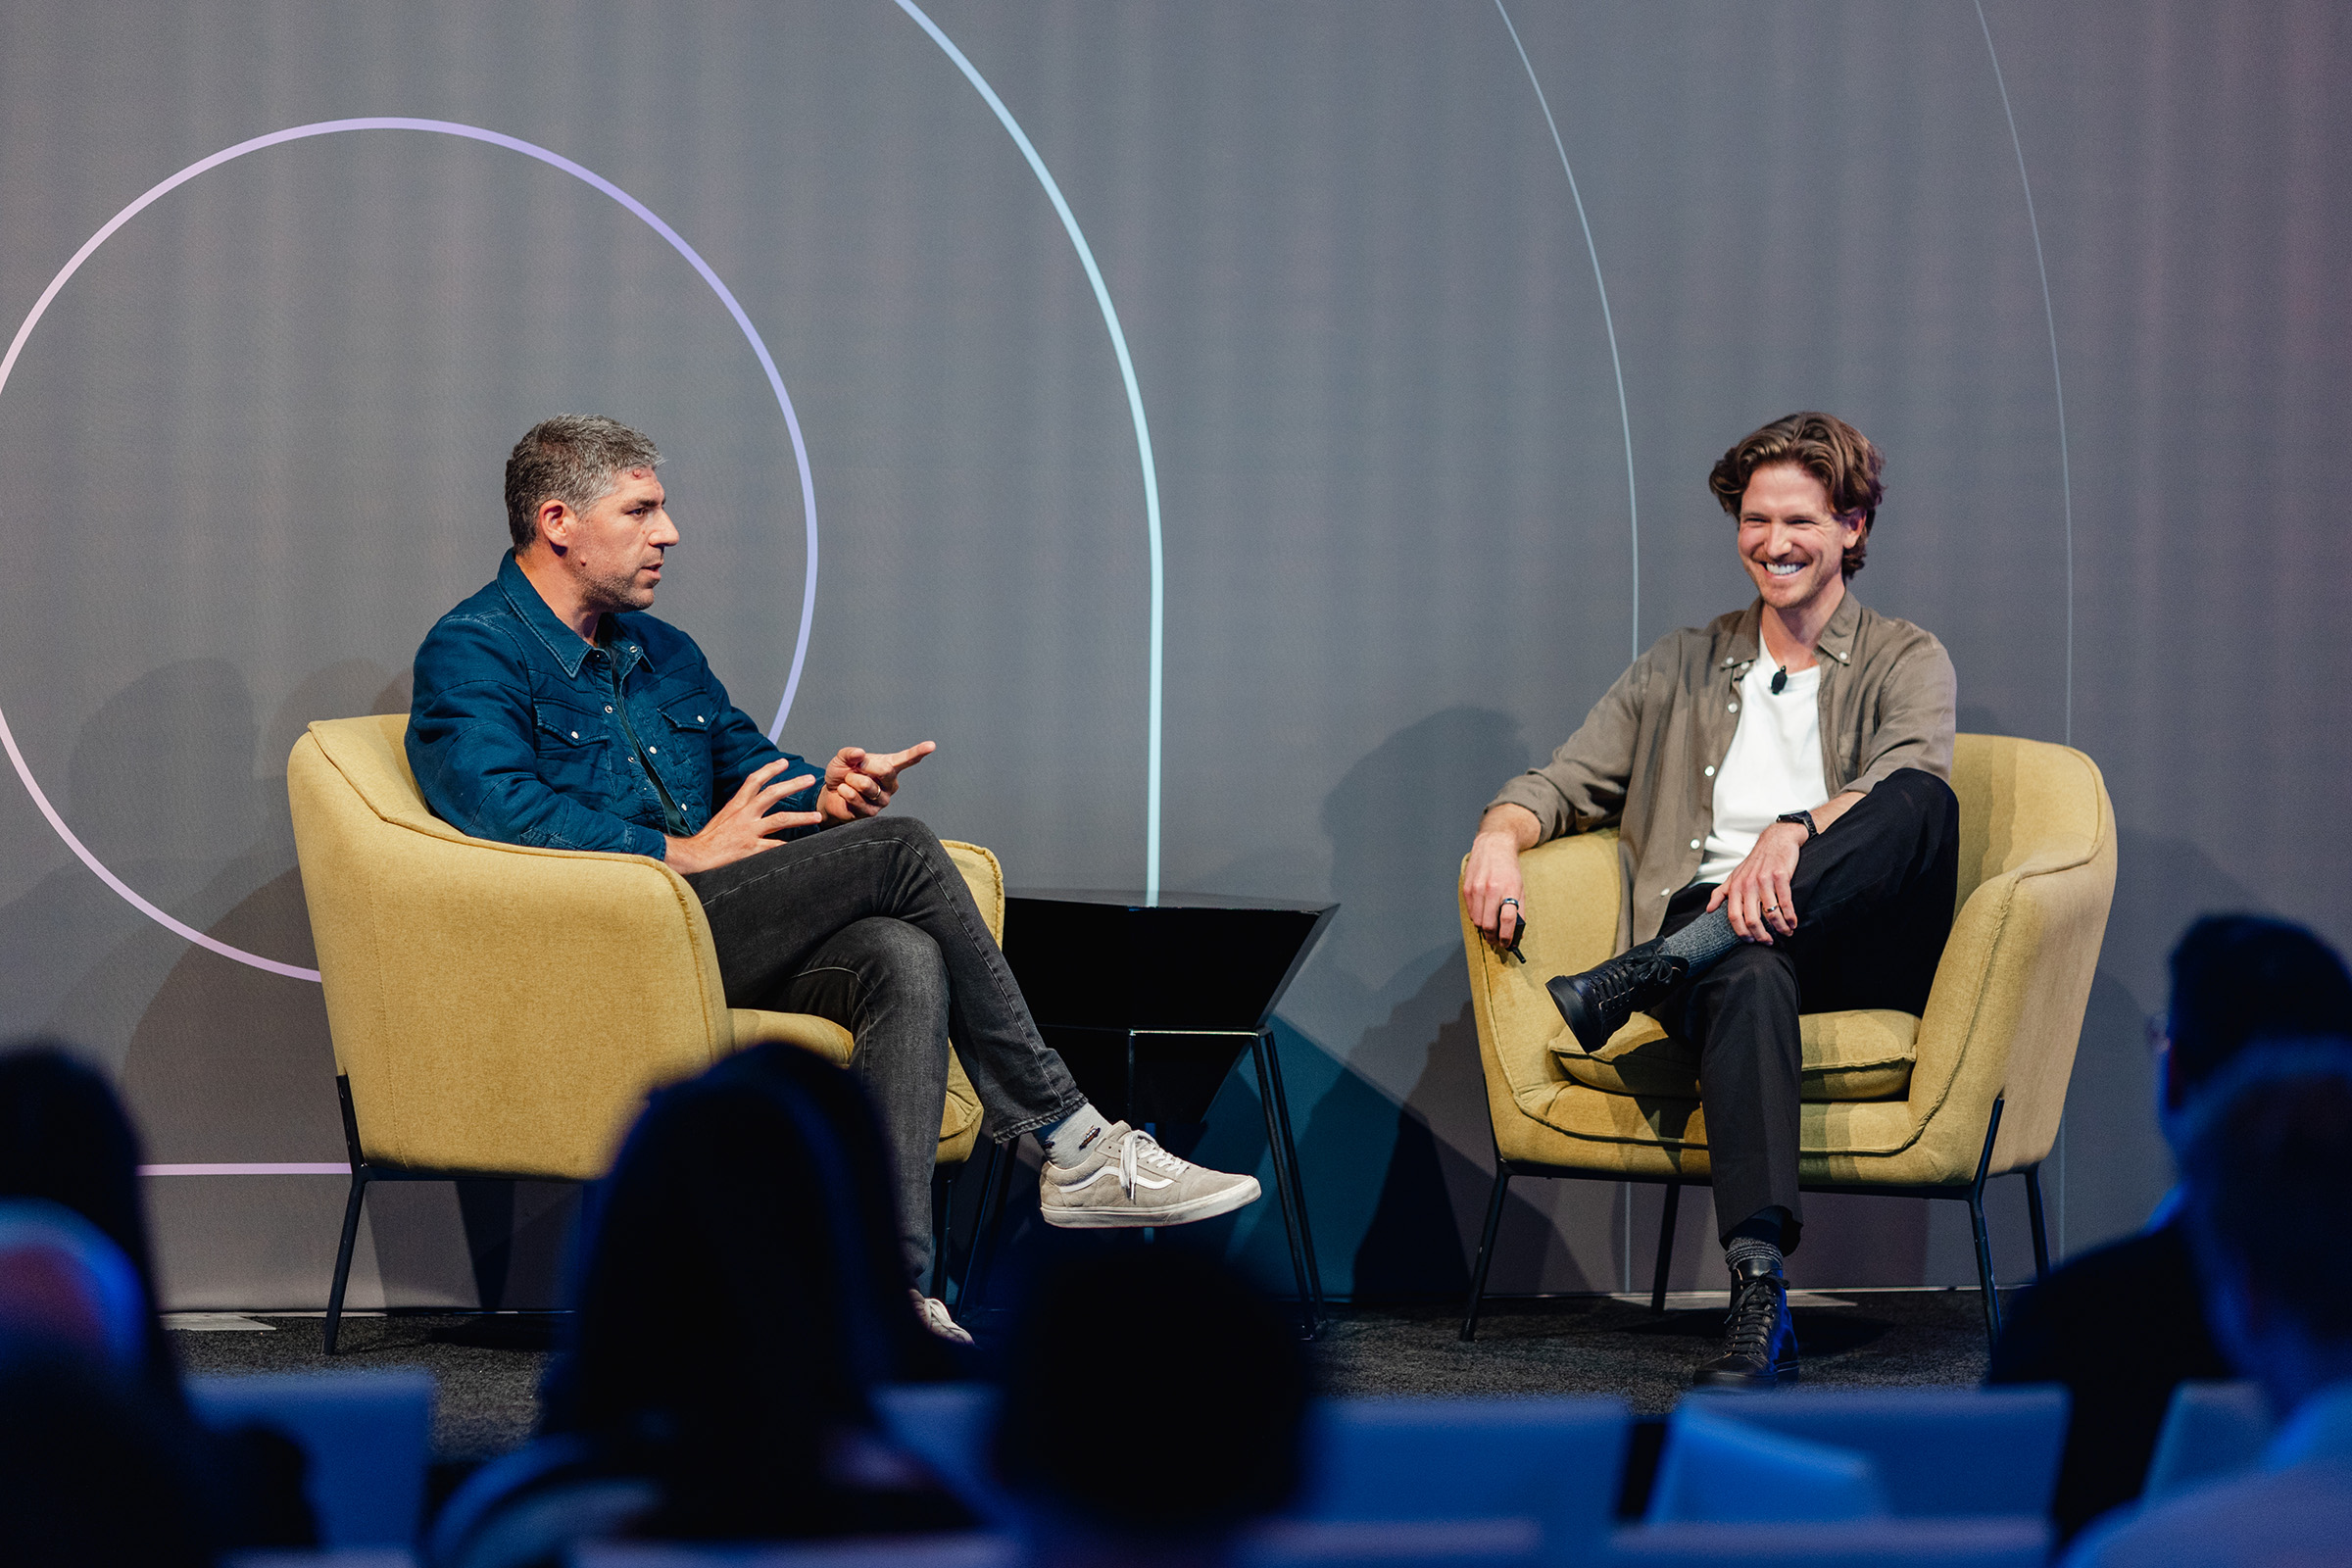 Two men engaged in content creation sit on chairs and engage in a conversation on stage.